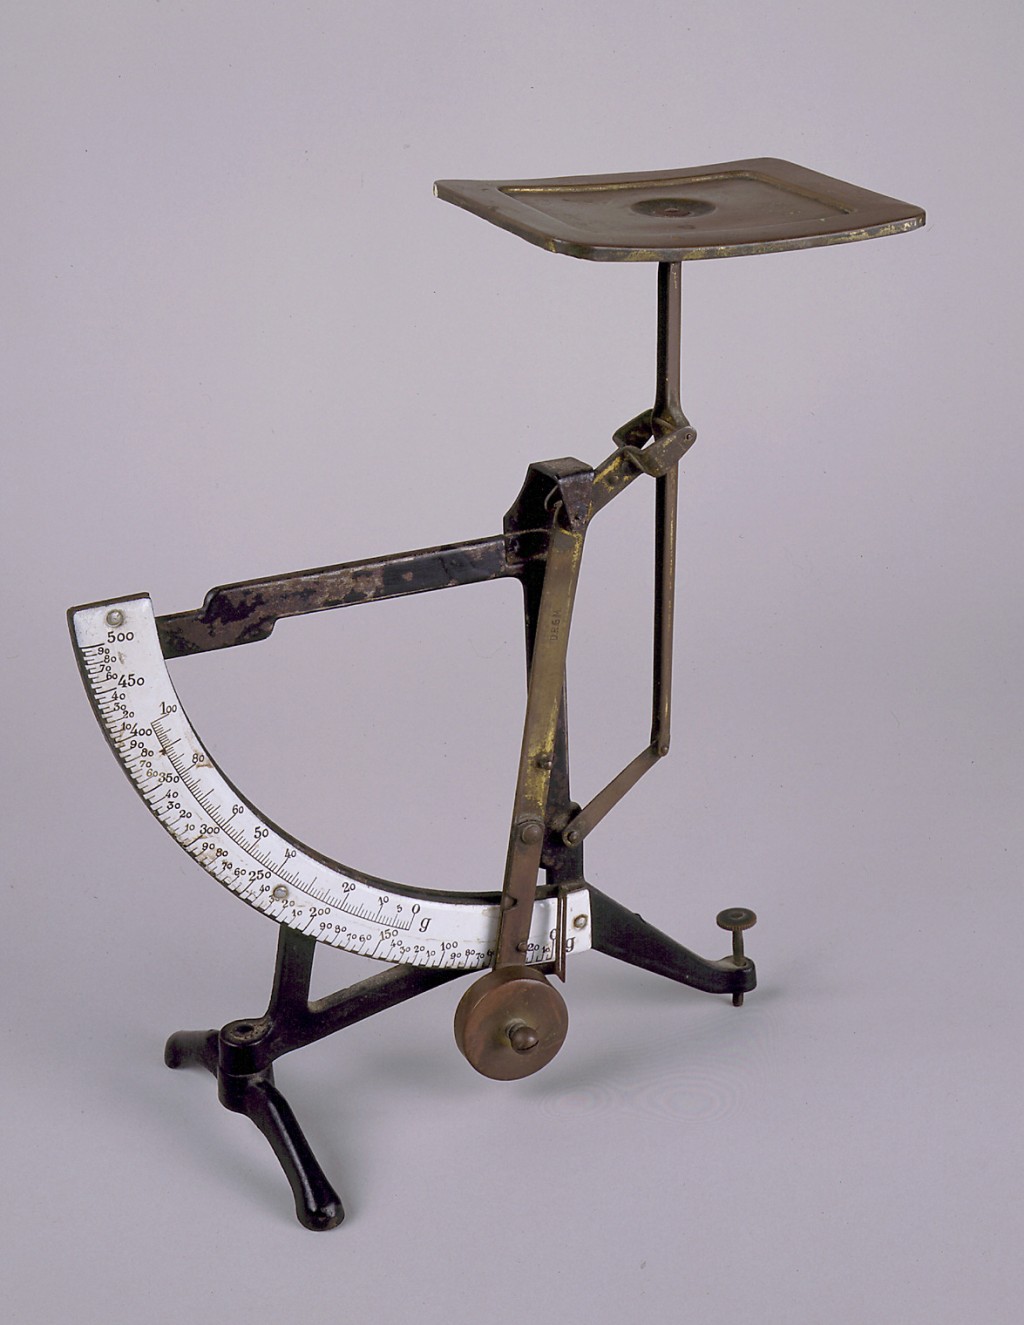 Scales used by refugees [LCID: 20027rkl]